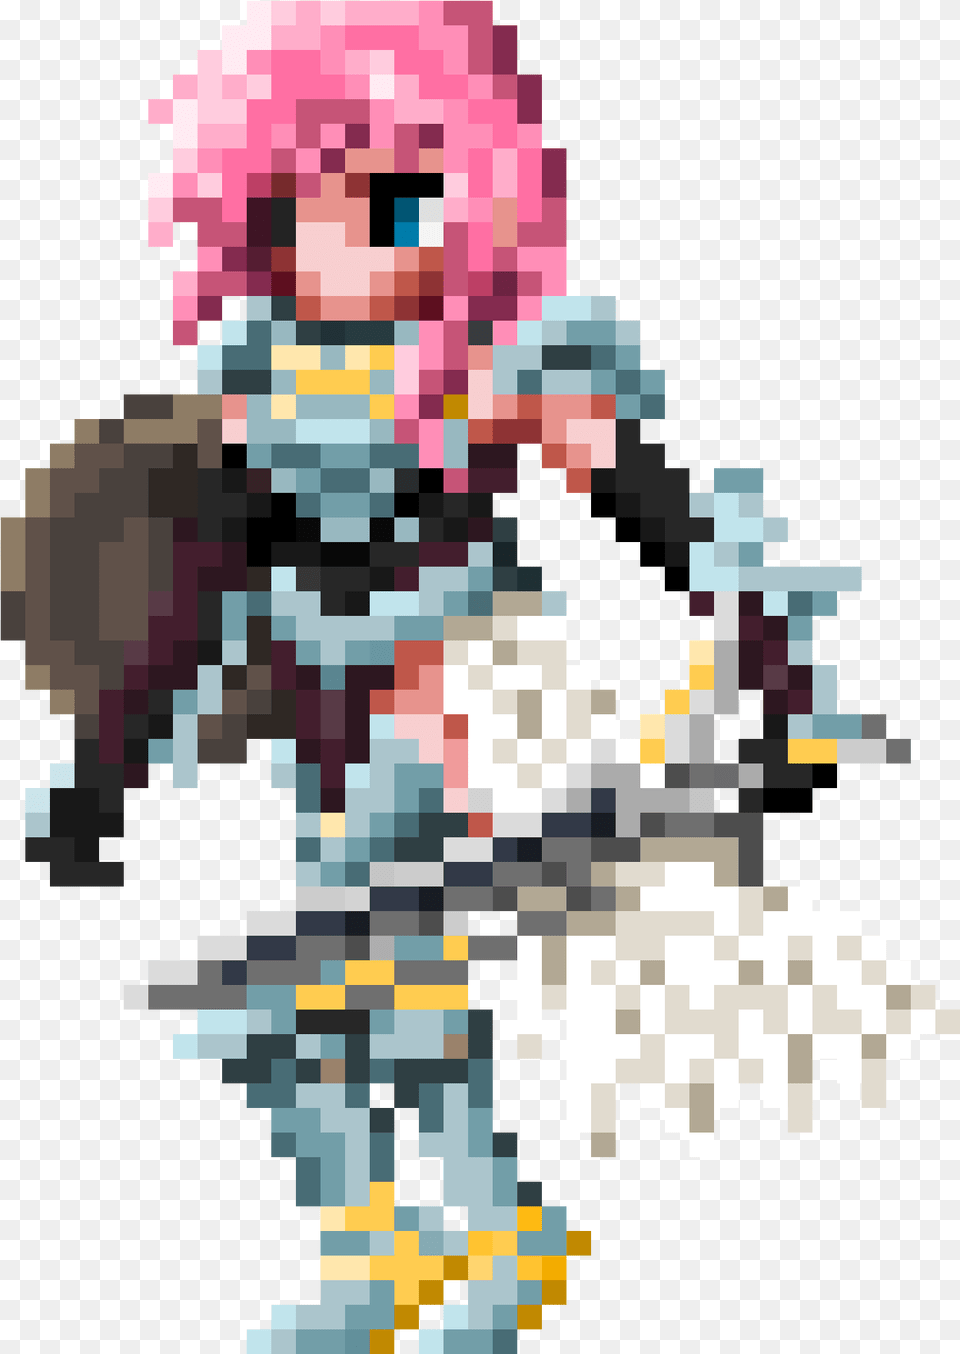 I Hope It S Not Too Messy It S Very Hard To Make Details Final Fantasy Lightning Sprite, Chess, Game Free Png Download